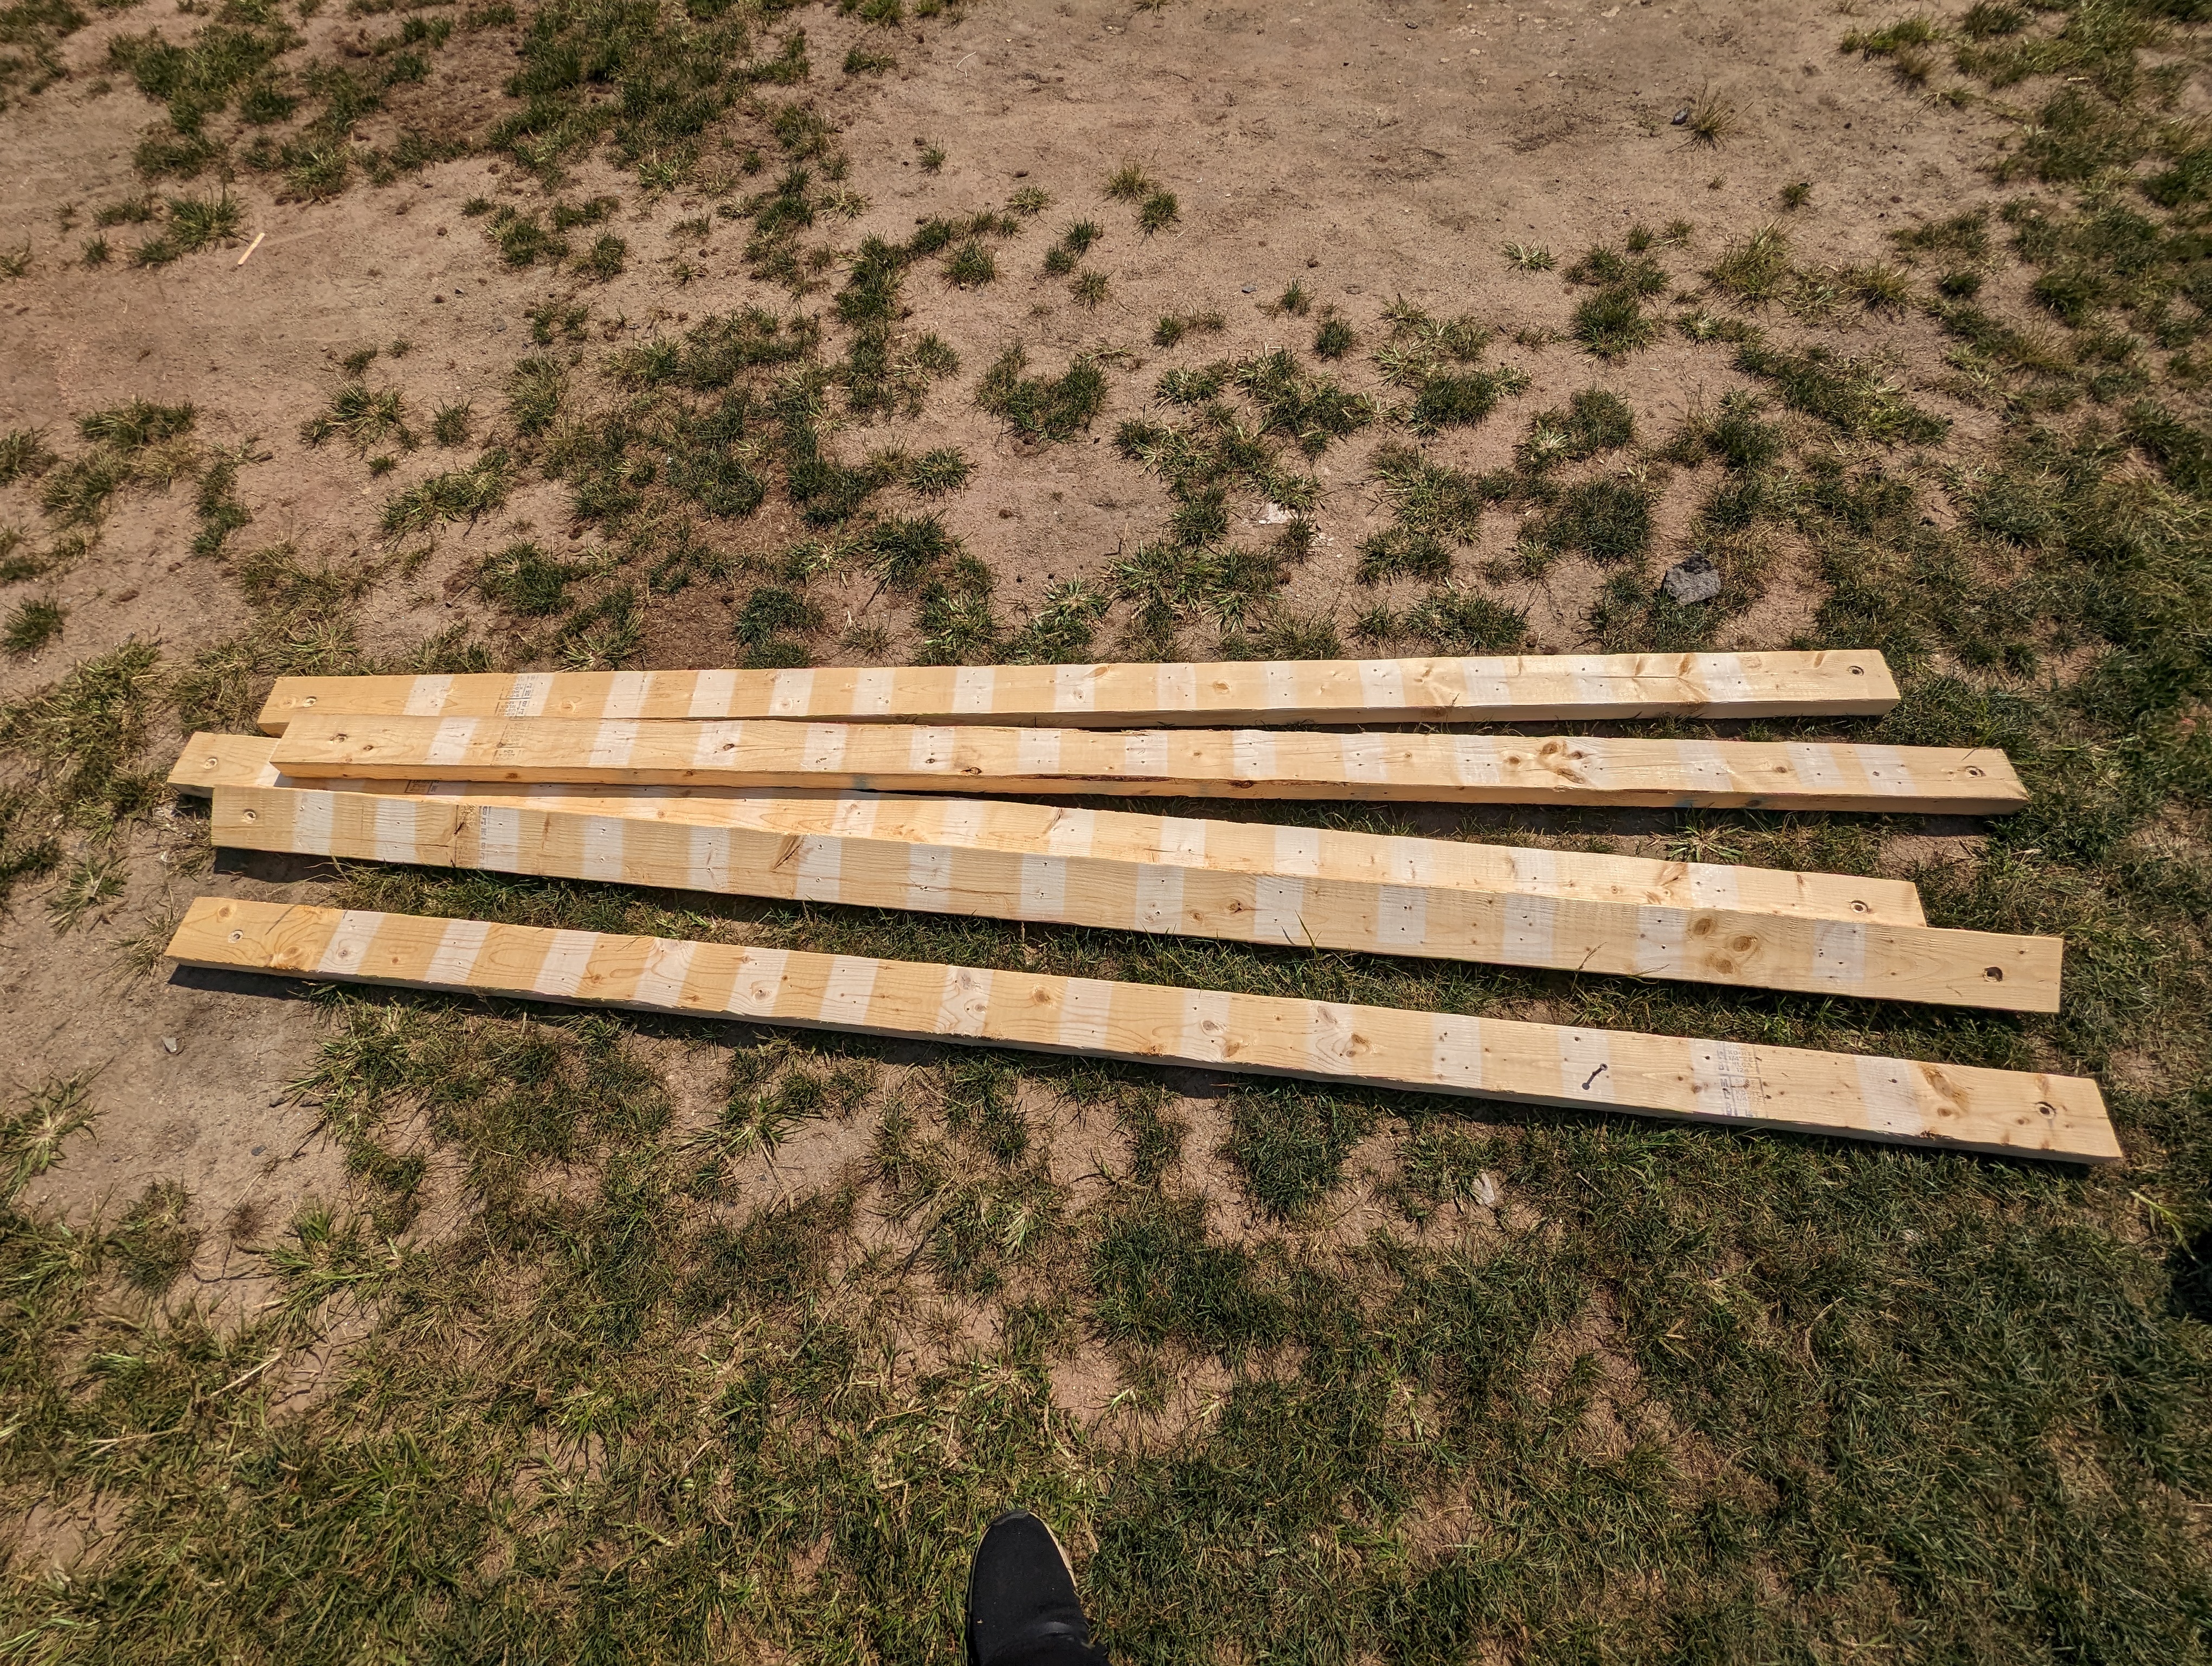 A few 2x4s with stripes running across.